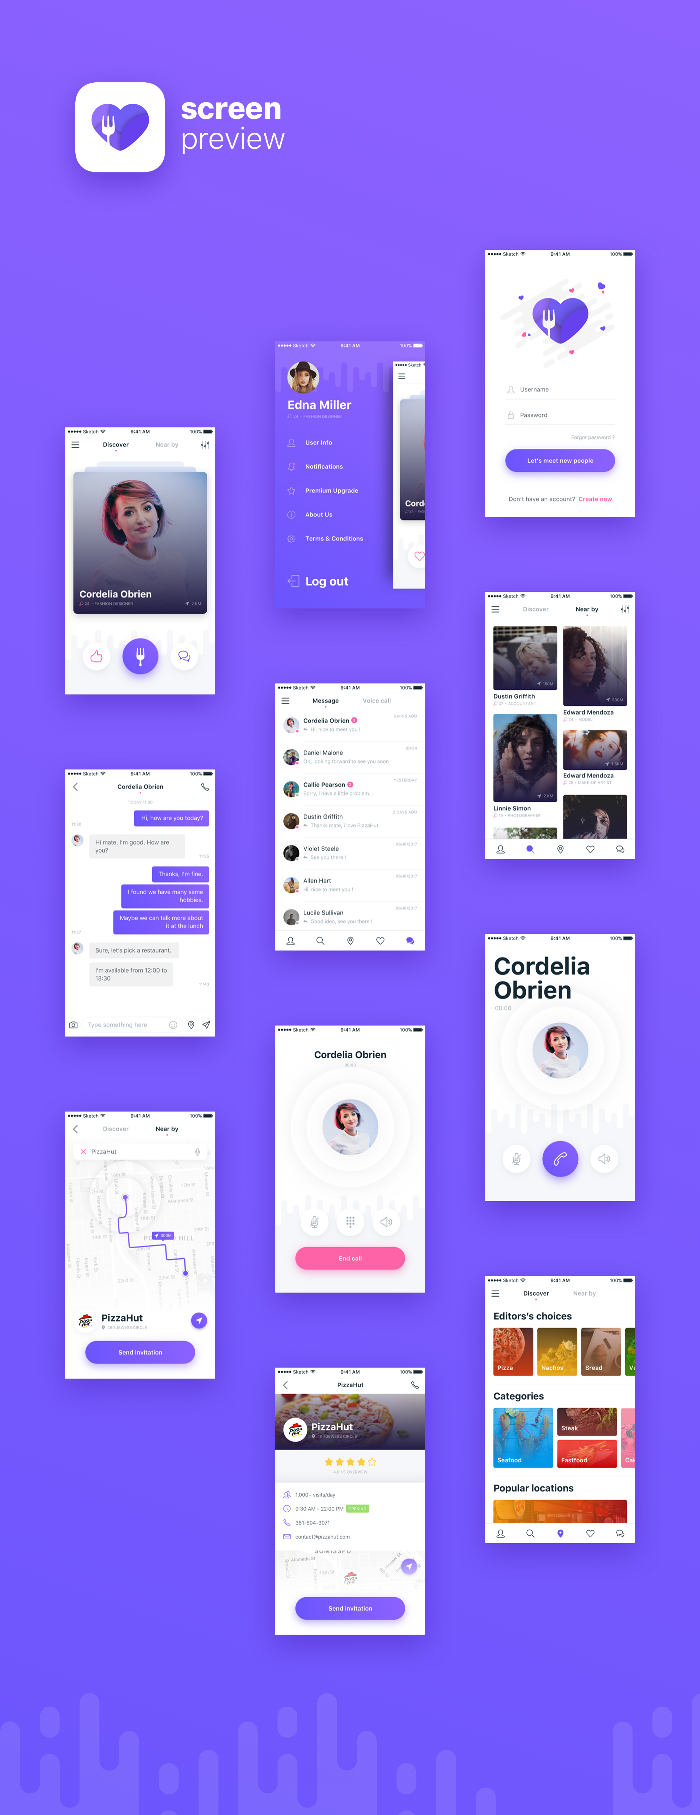 Lunchmate - dating app template